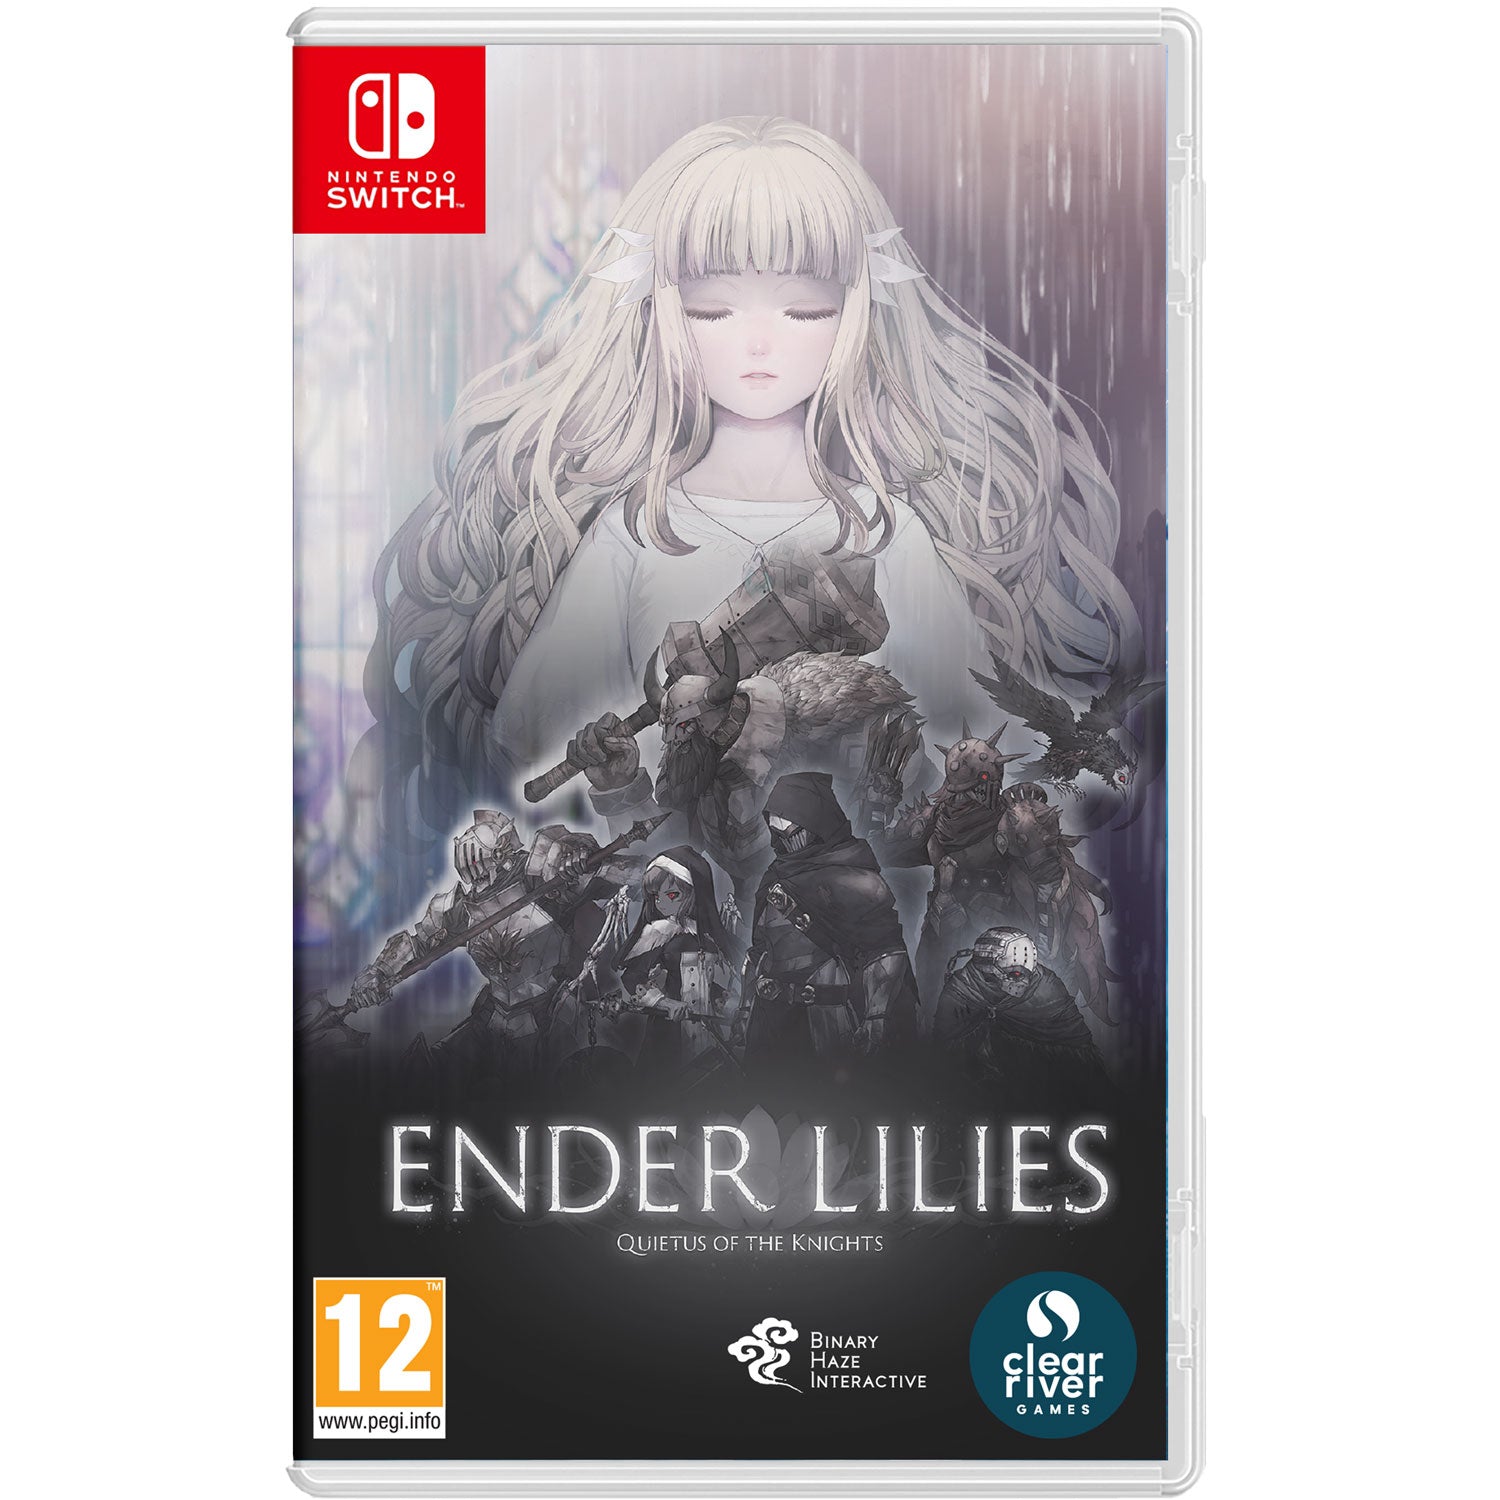 Nintendo Switch Ender Lilies Quietus of the Knights